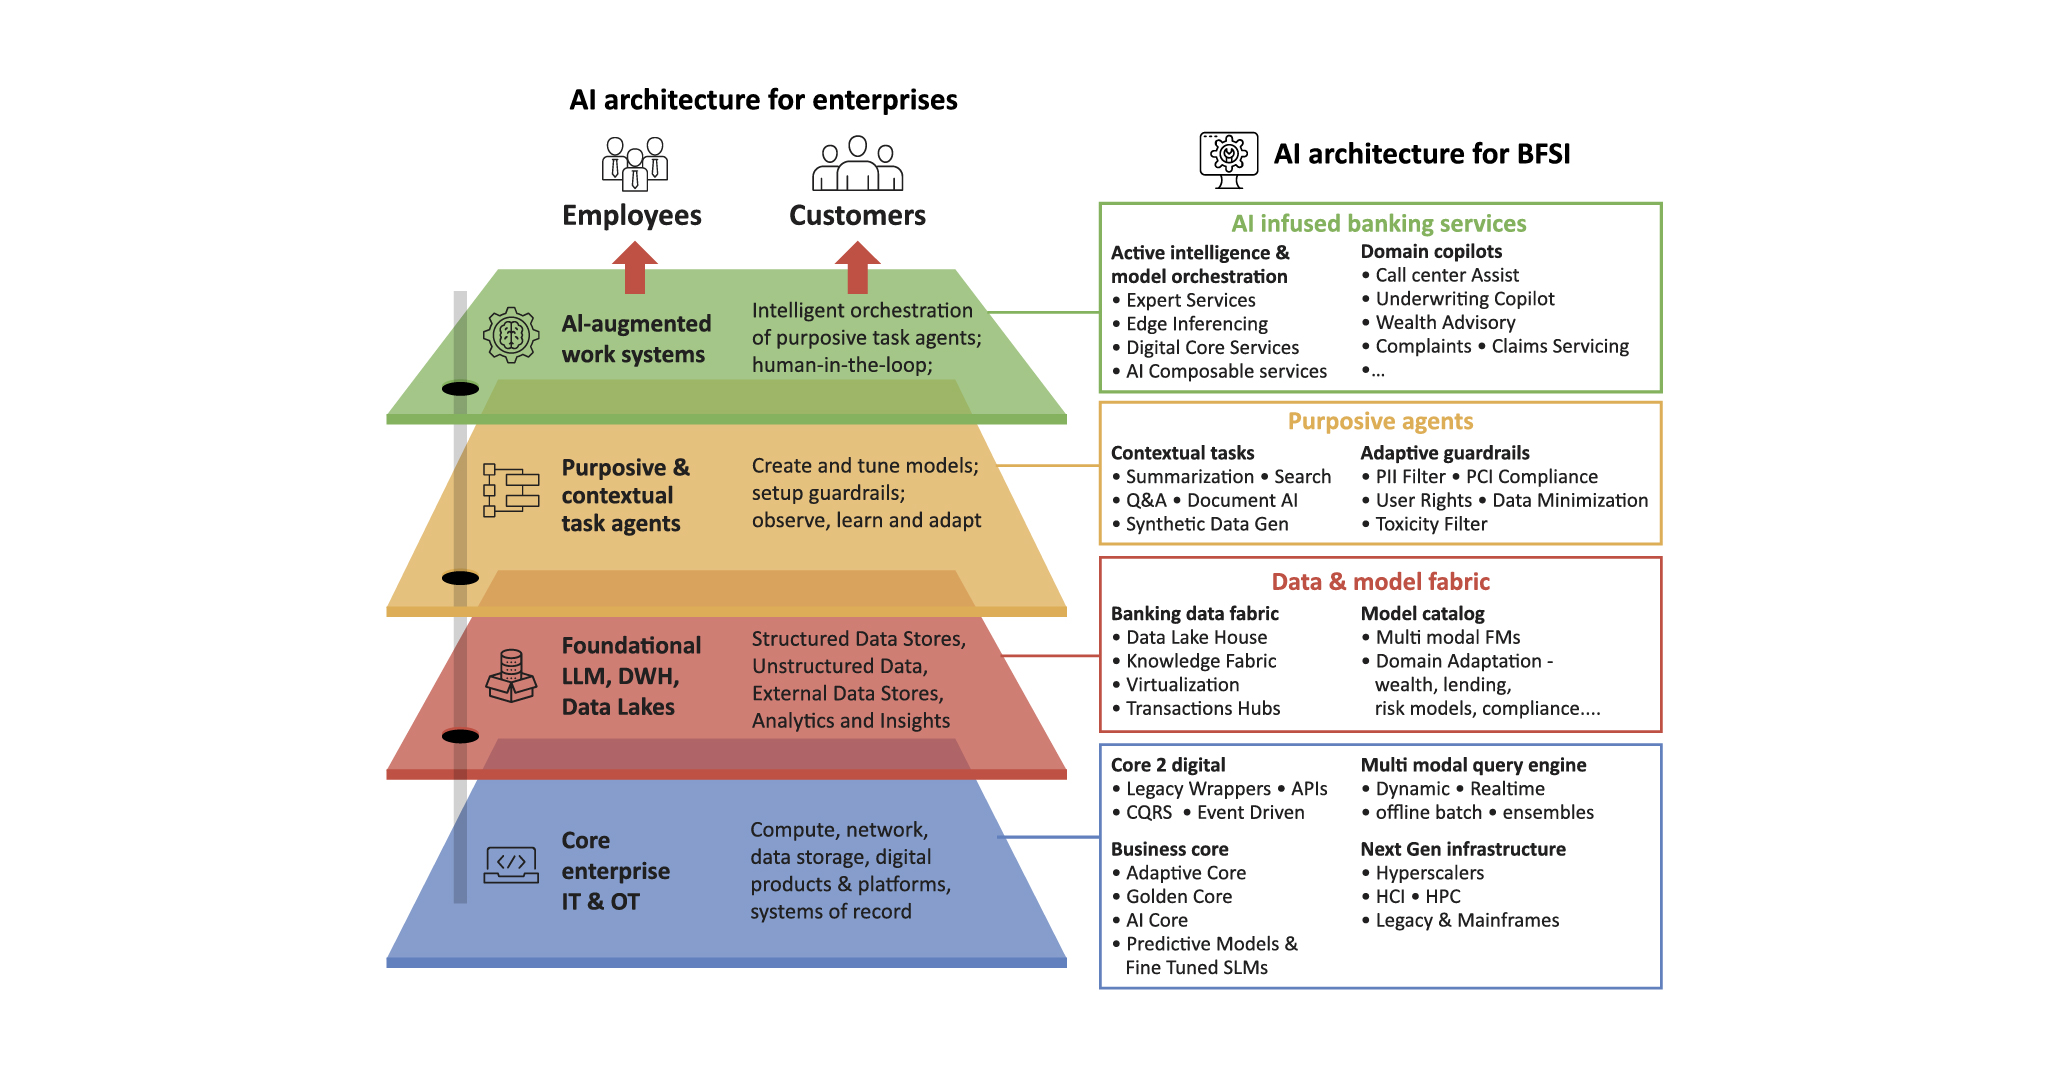 This image shows a multi-layered, multi-tiered AI architecture and framework for BFSI.